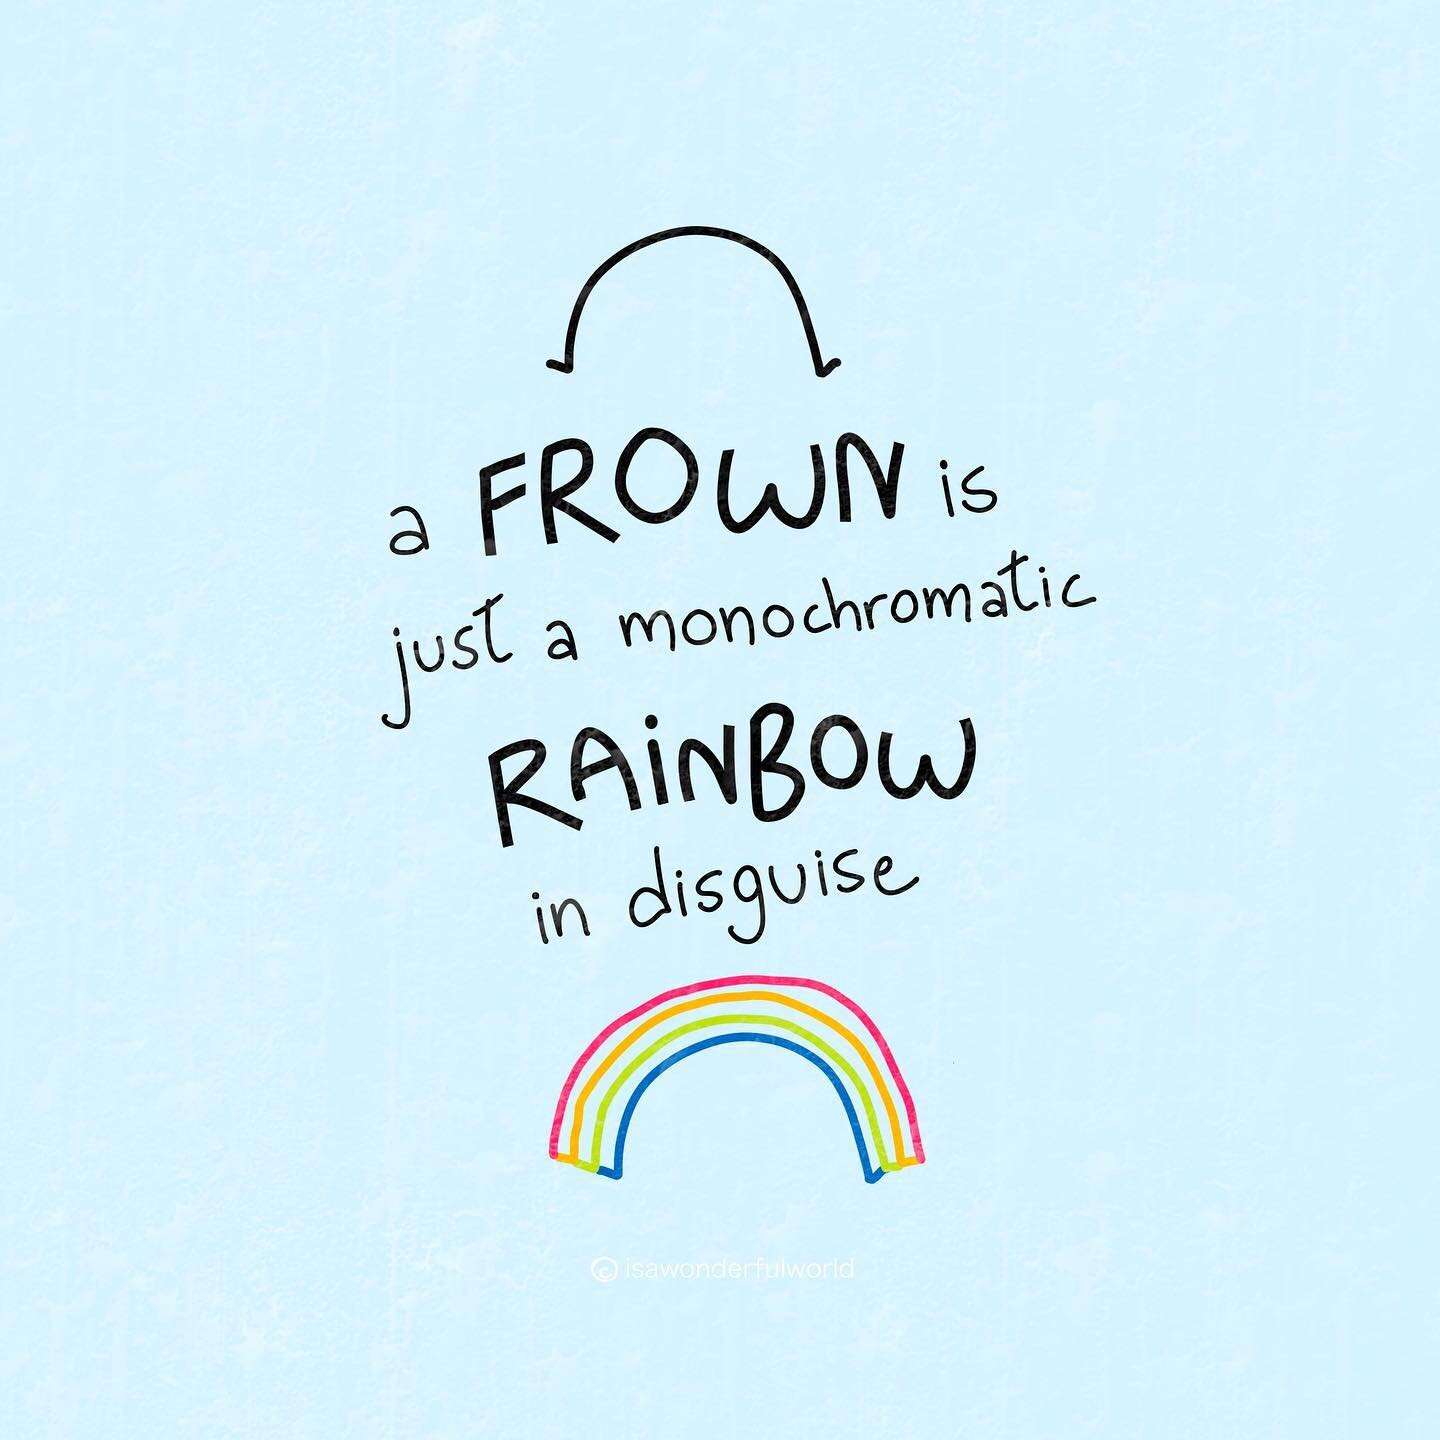 I had a very important realization this weekend: a frown is just a rainbow in disguise! Things can&rsquo;t always be perfect like rainbows, but there&rsquo;s always a way to make it all better.
#rainbow #frown #quote #positivity #joyspotting